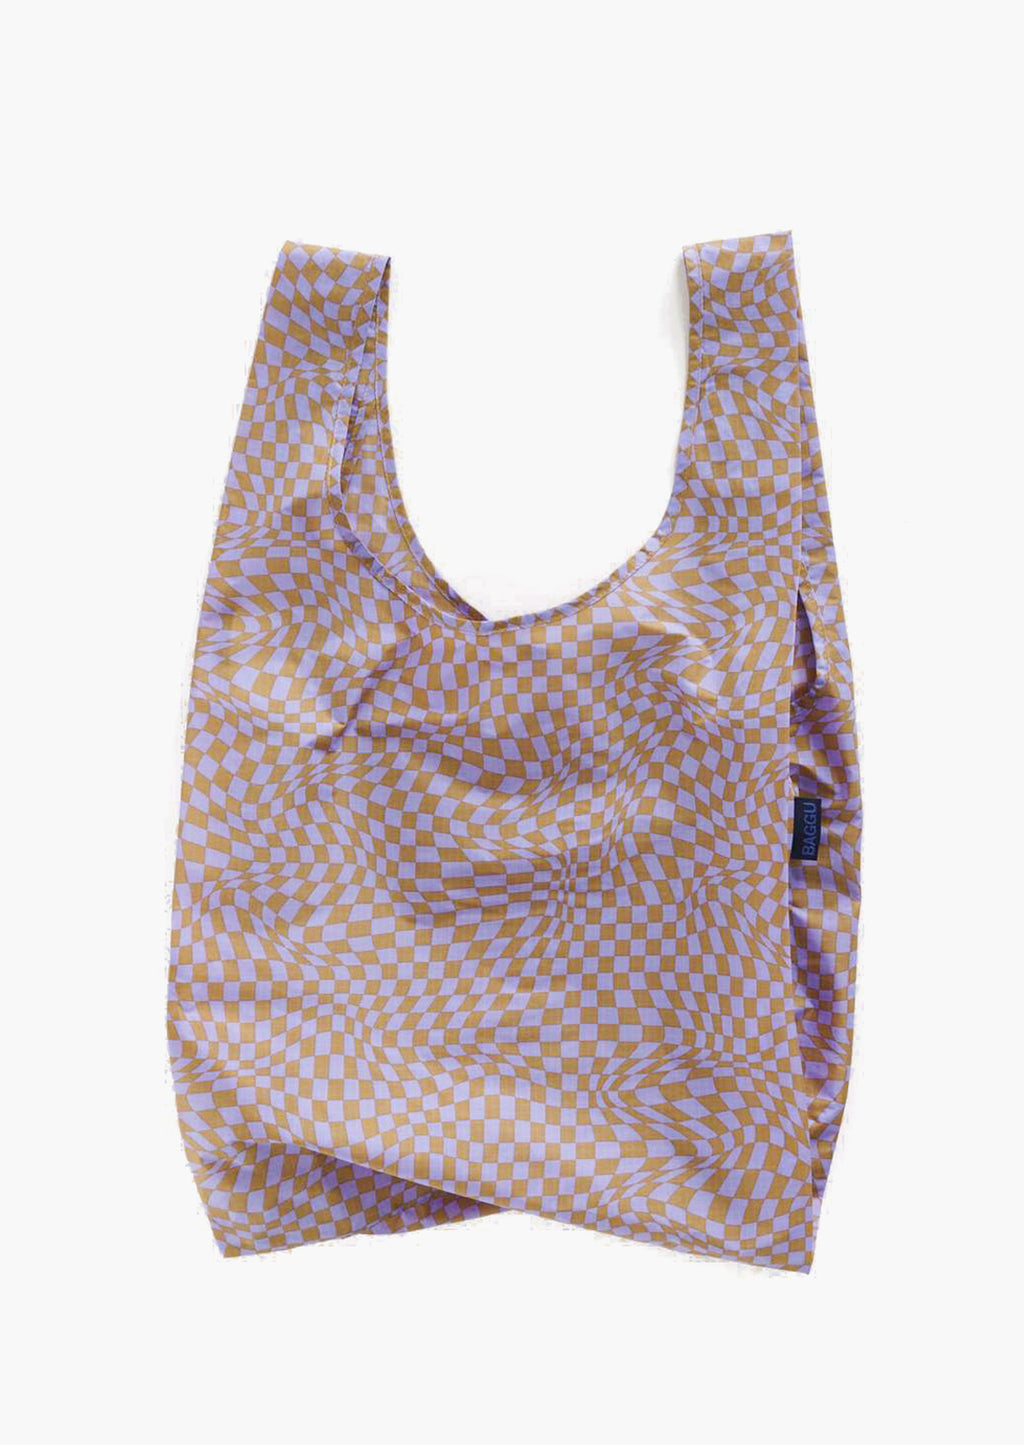 Lavender Trippy Checker: A reusuable standard Baggu bag in lavender trippy checker print.